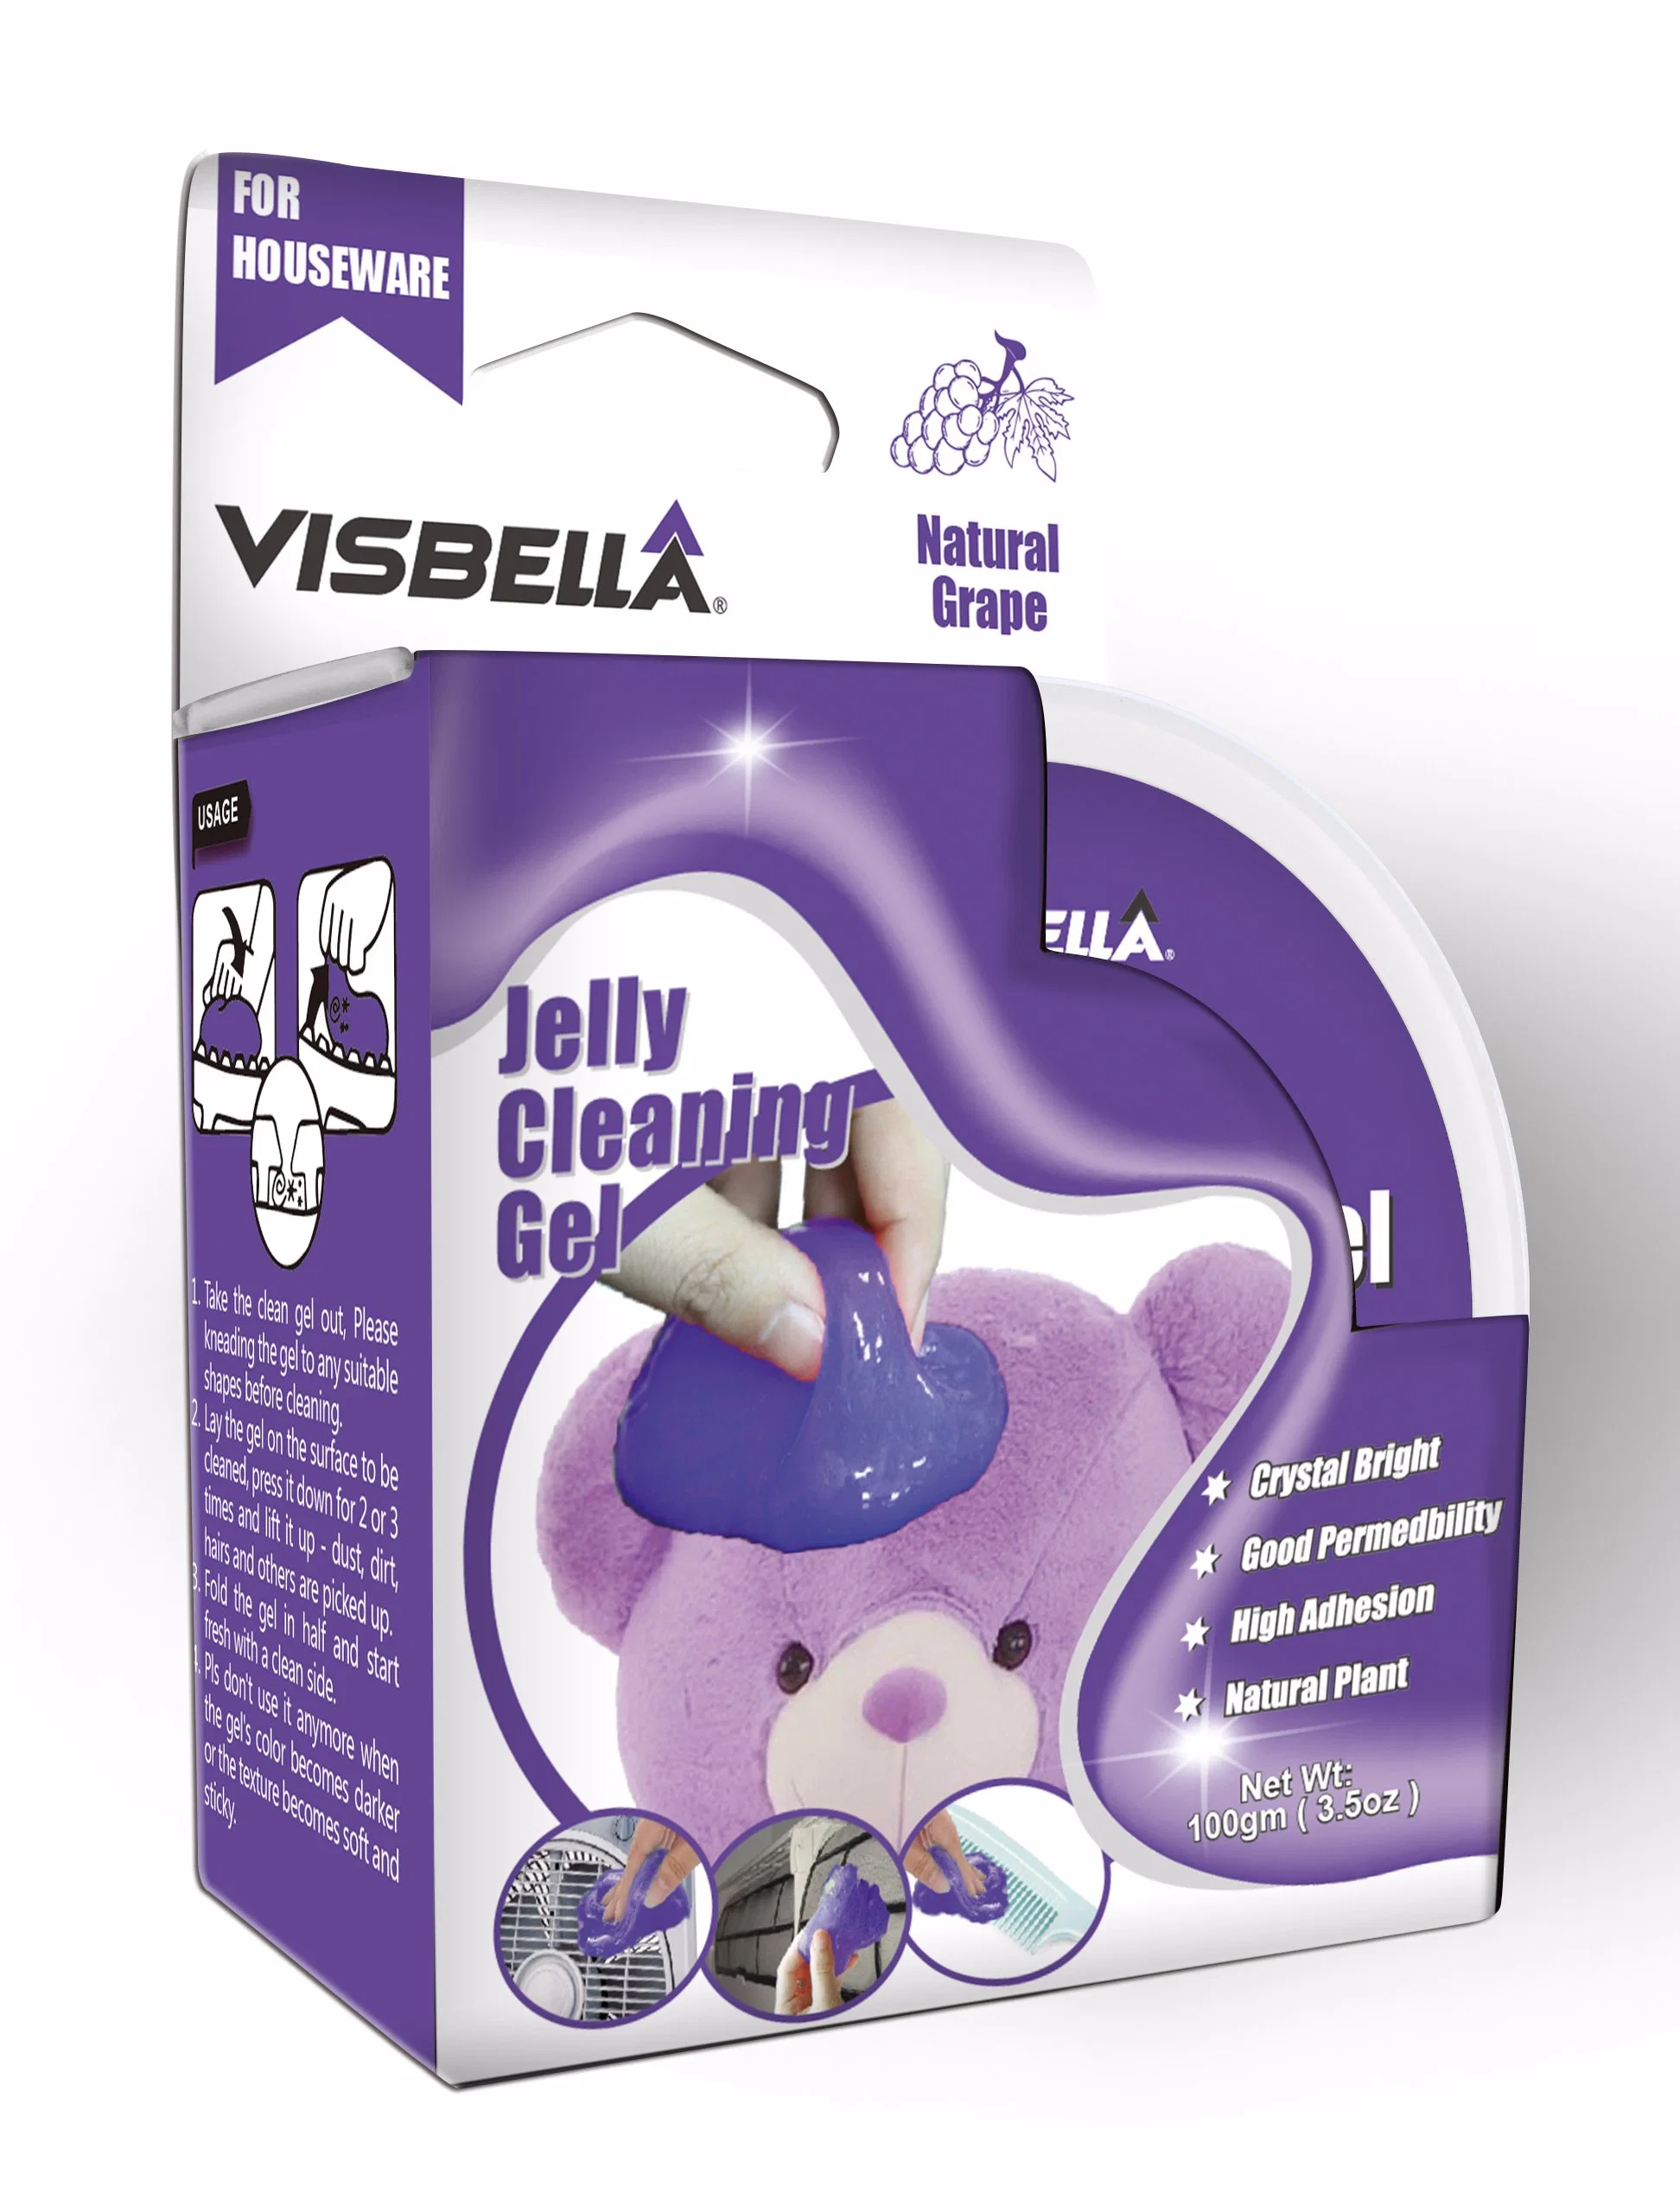 Visbella Jelly Cleaning Gel Cleaning Dirt of Keyboard as Gifts